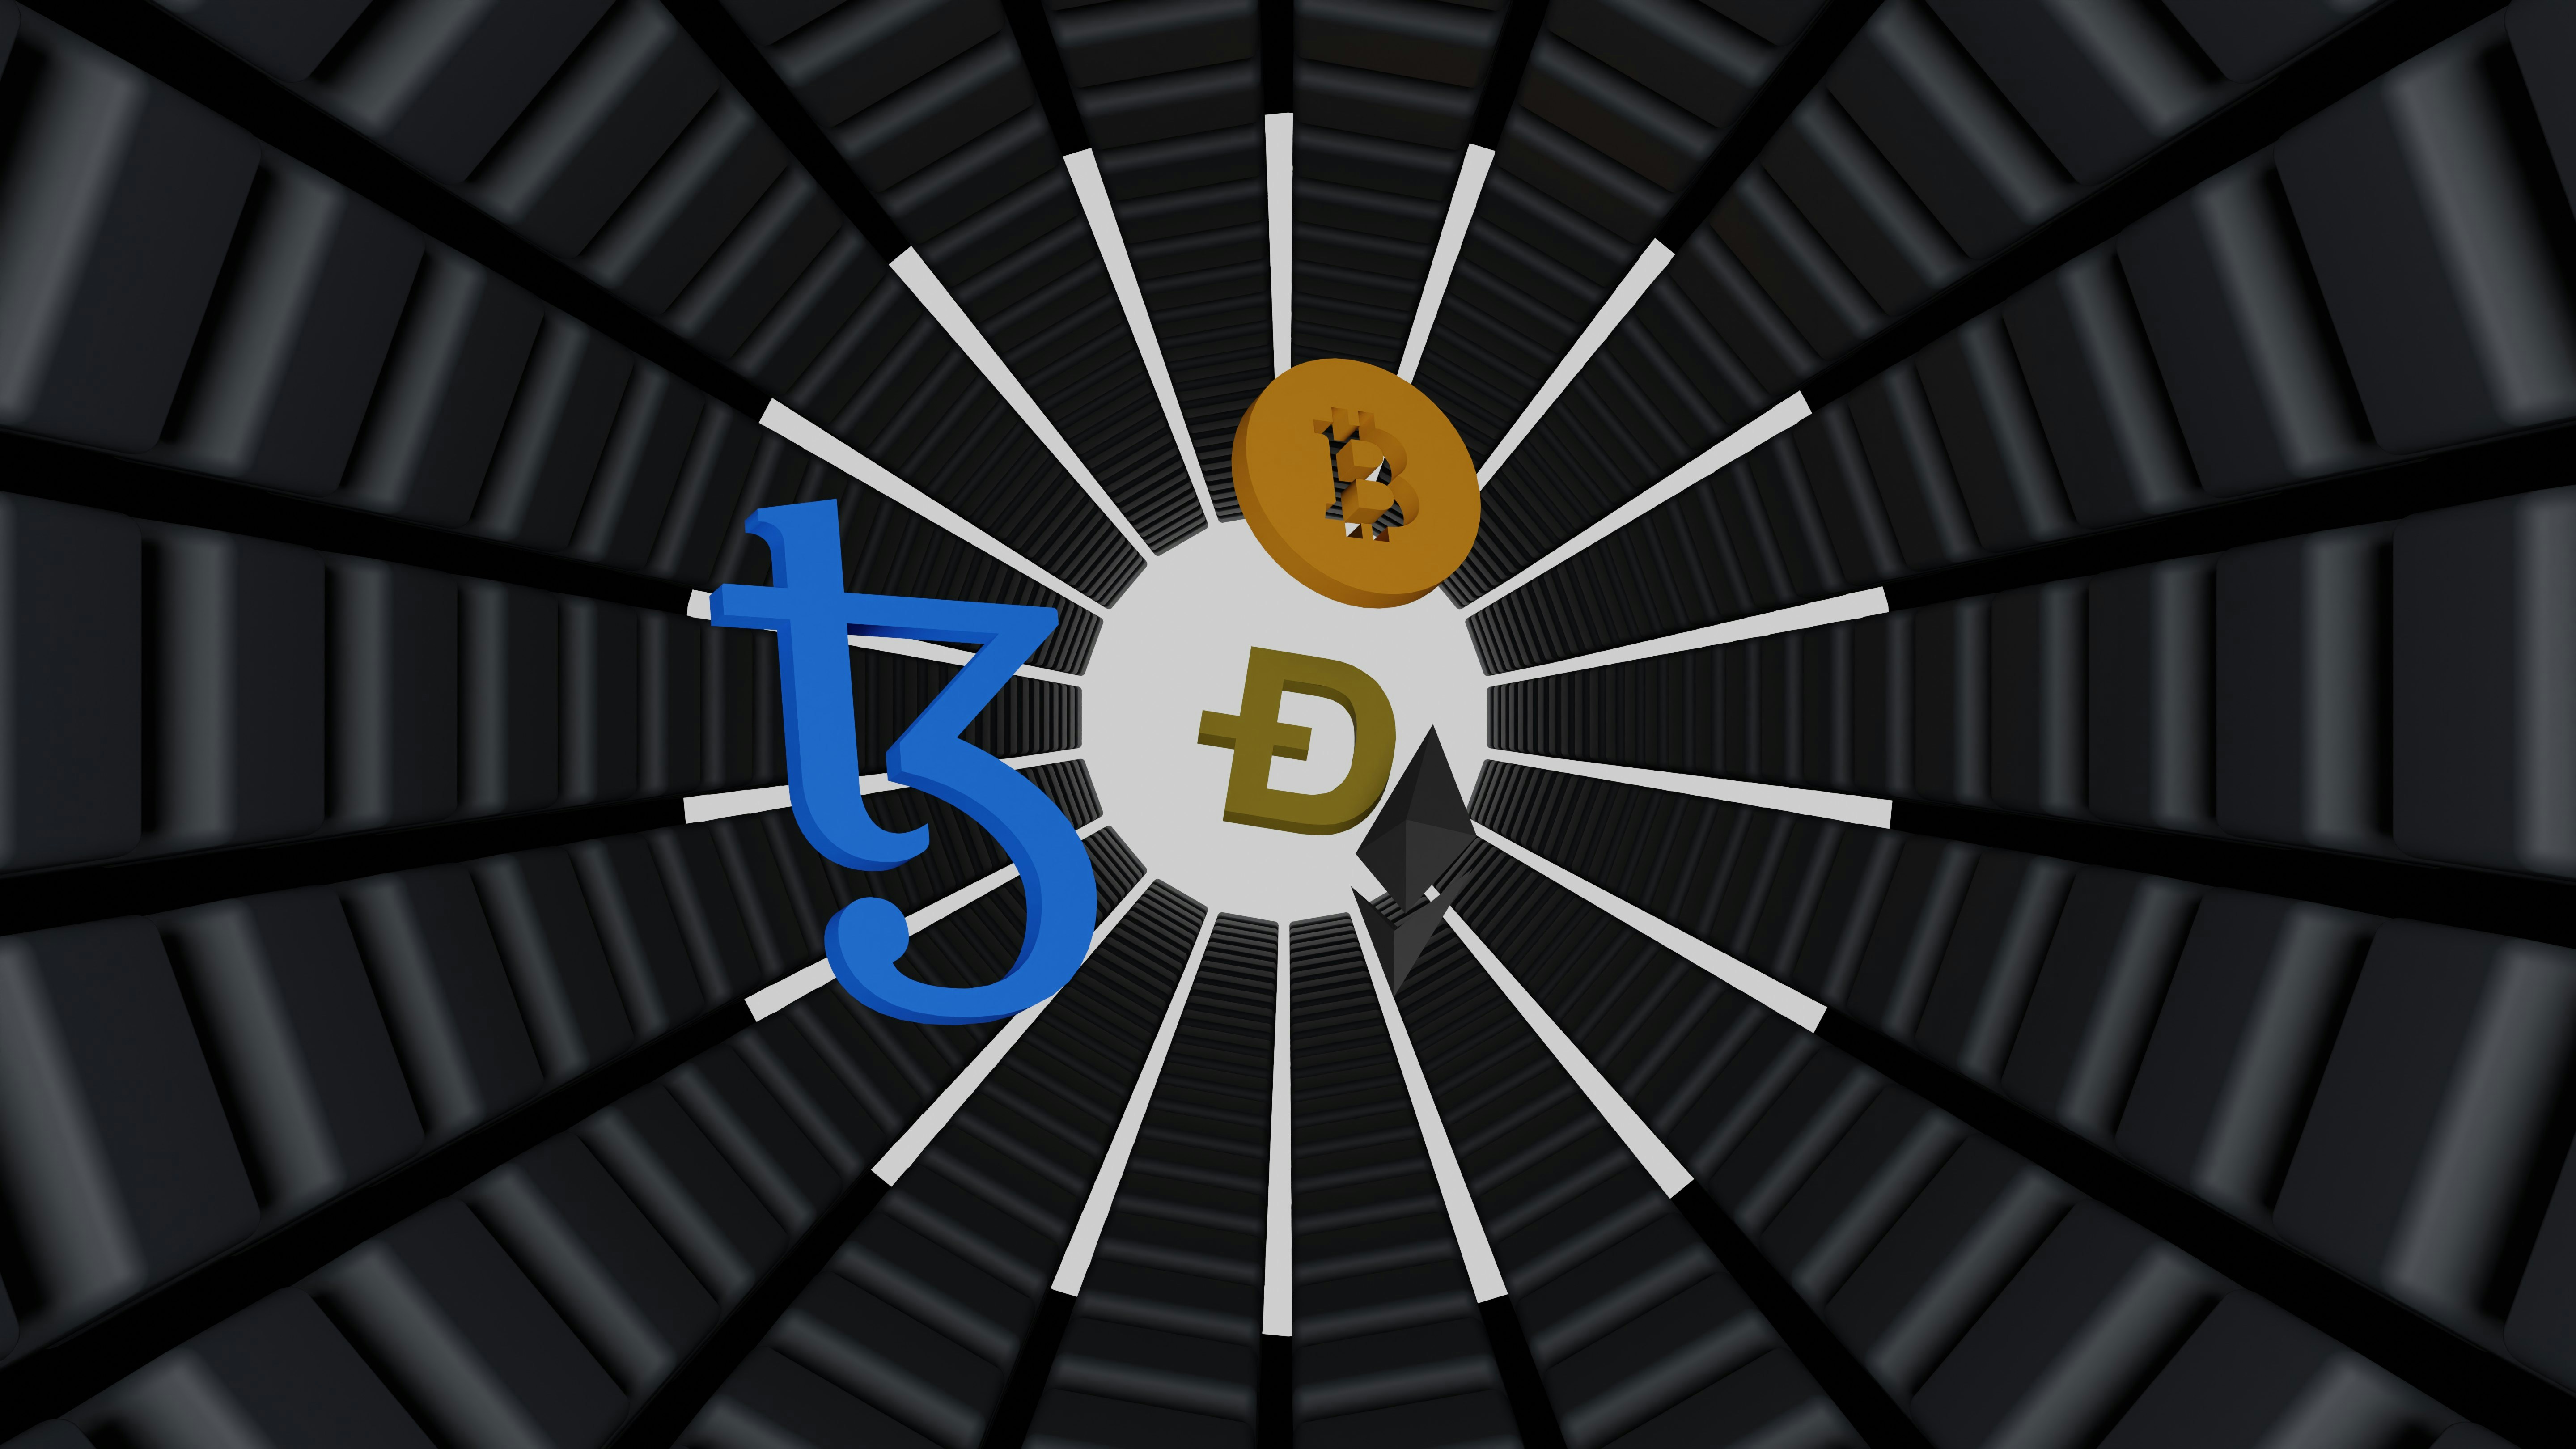 3D illustration of Tezos coin, bitcoin, Ehtereum, and dogecoin floating in an Infinite deep space. Tezos is a blockchain designed to evolve. work 👇: Email: shubhamdhage000@gmail.com